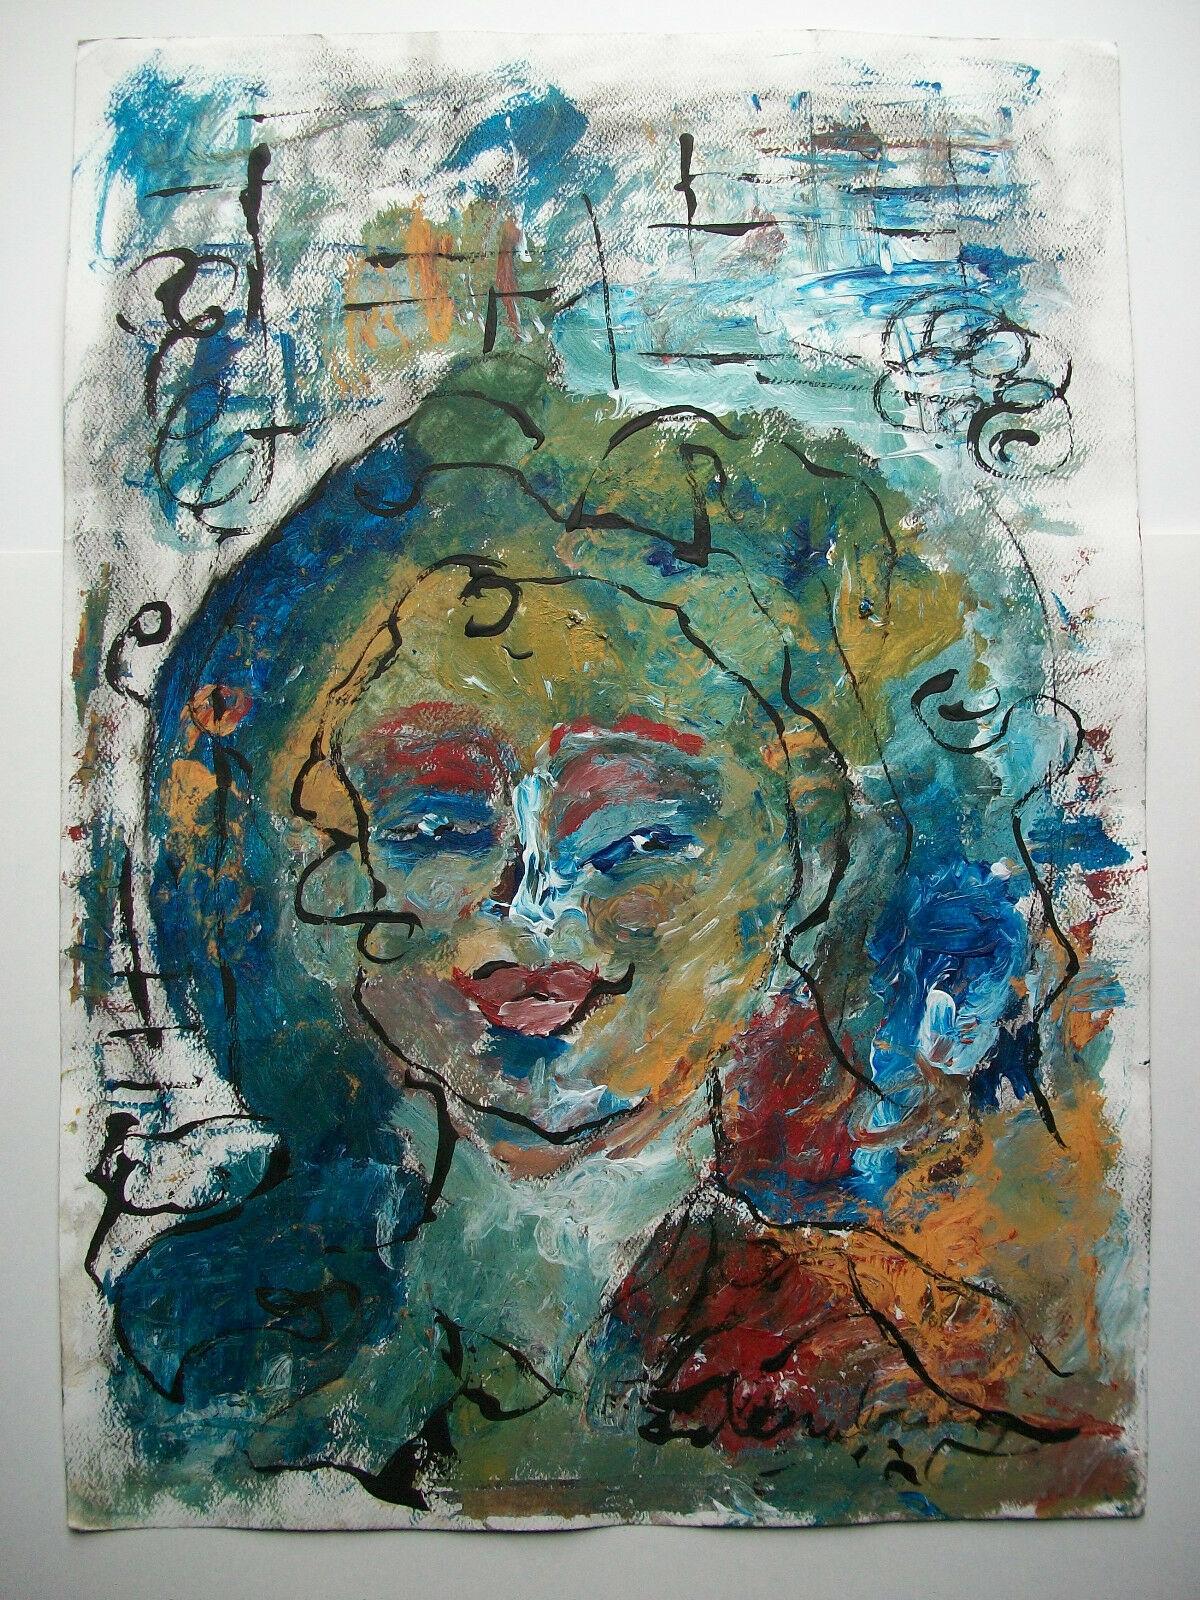 Sheila Denaburg, Contemporary Mixed Media Painting, Signed, Canada, C. 2011 For Sale 4